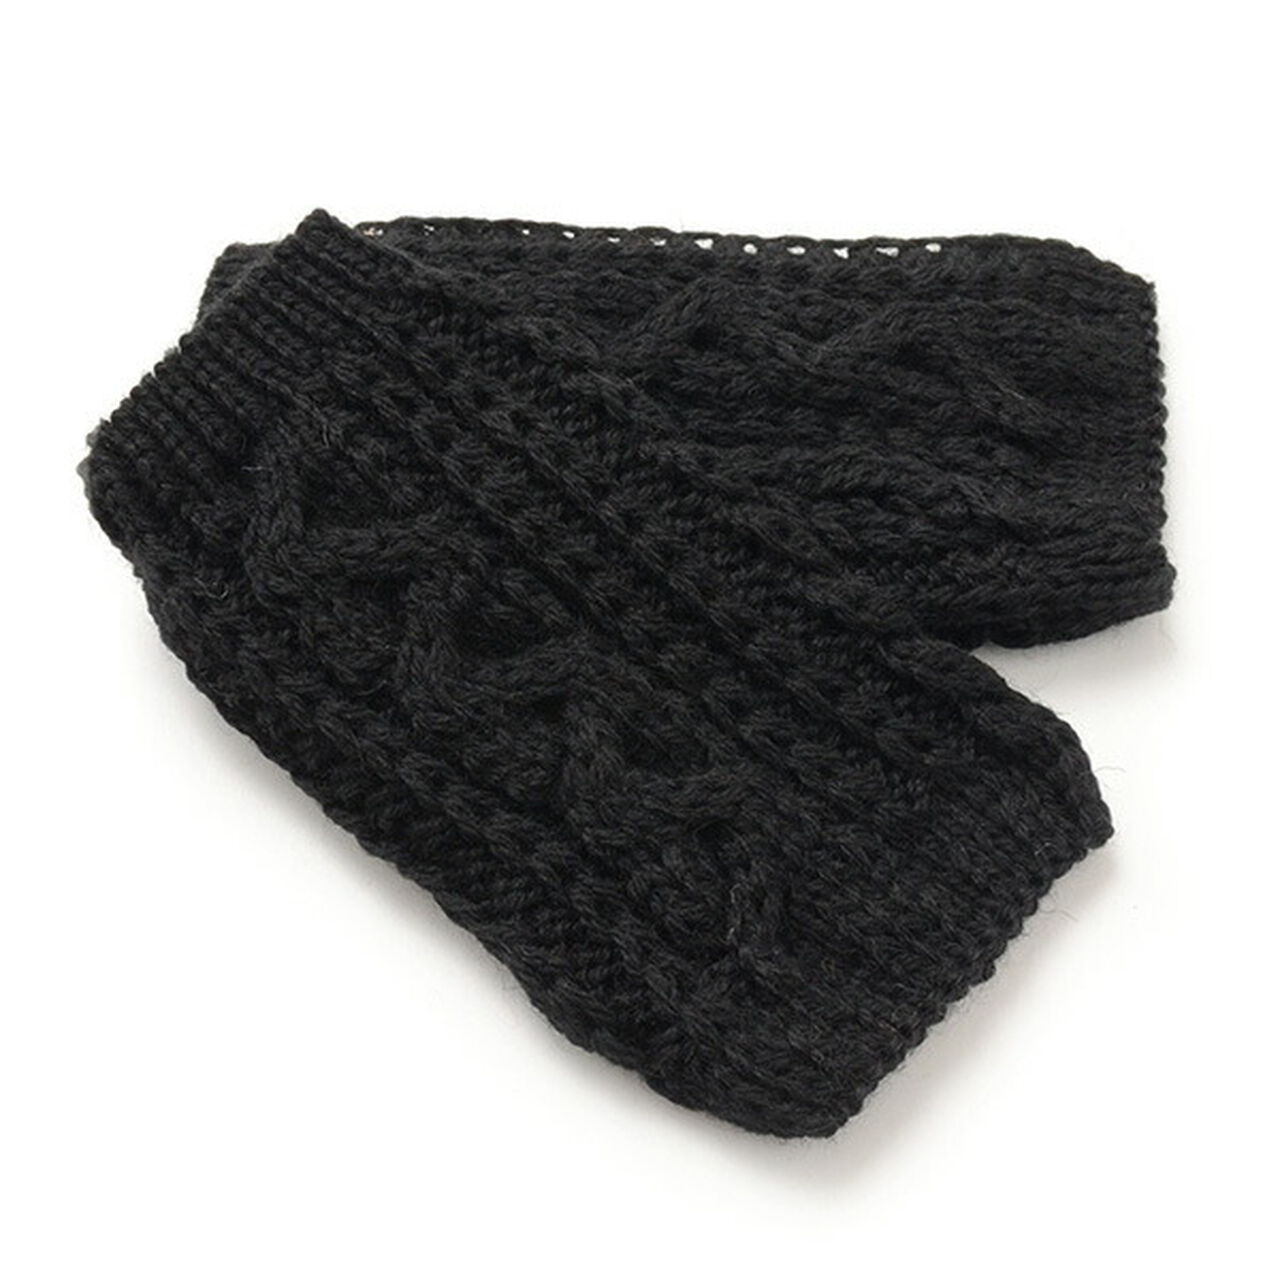 Cable Knits Mittens,Black, large image number 0